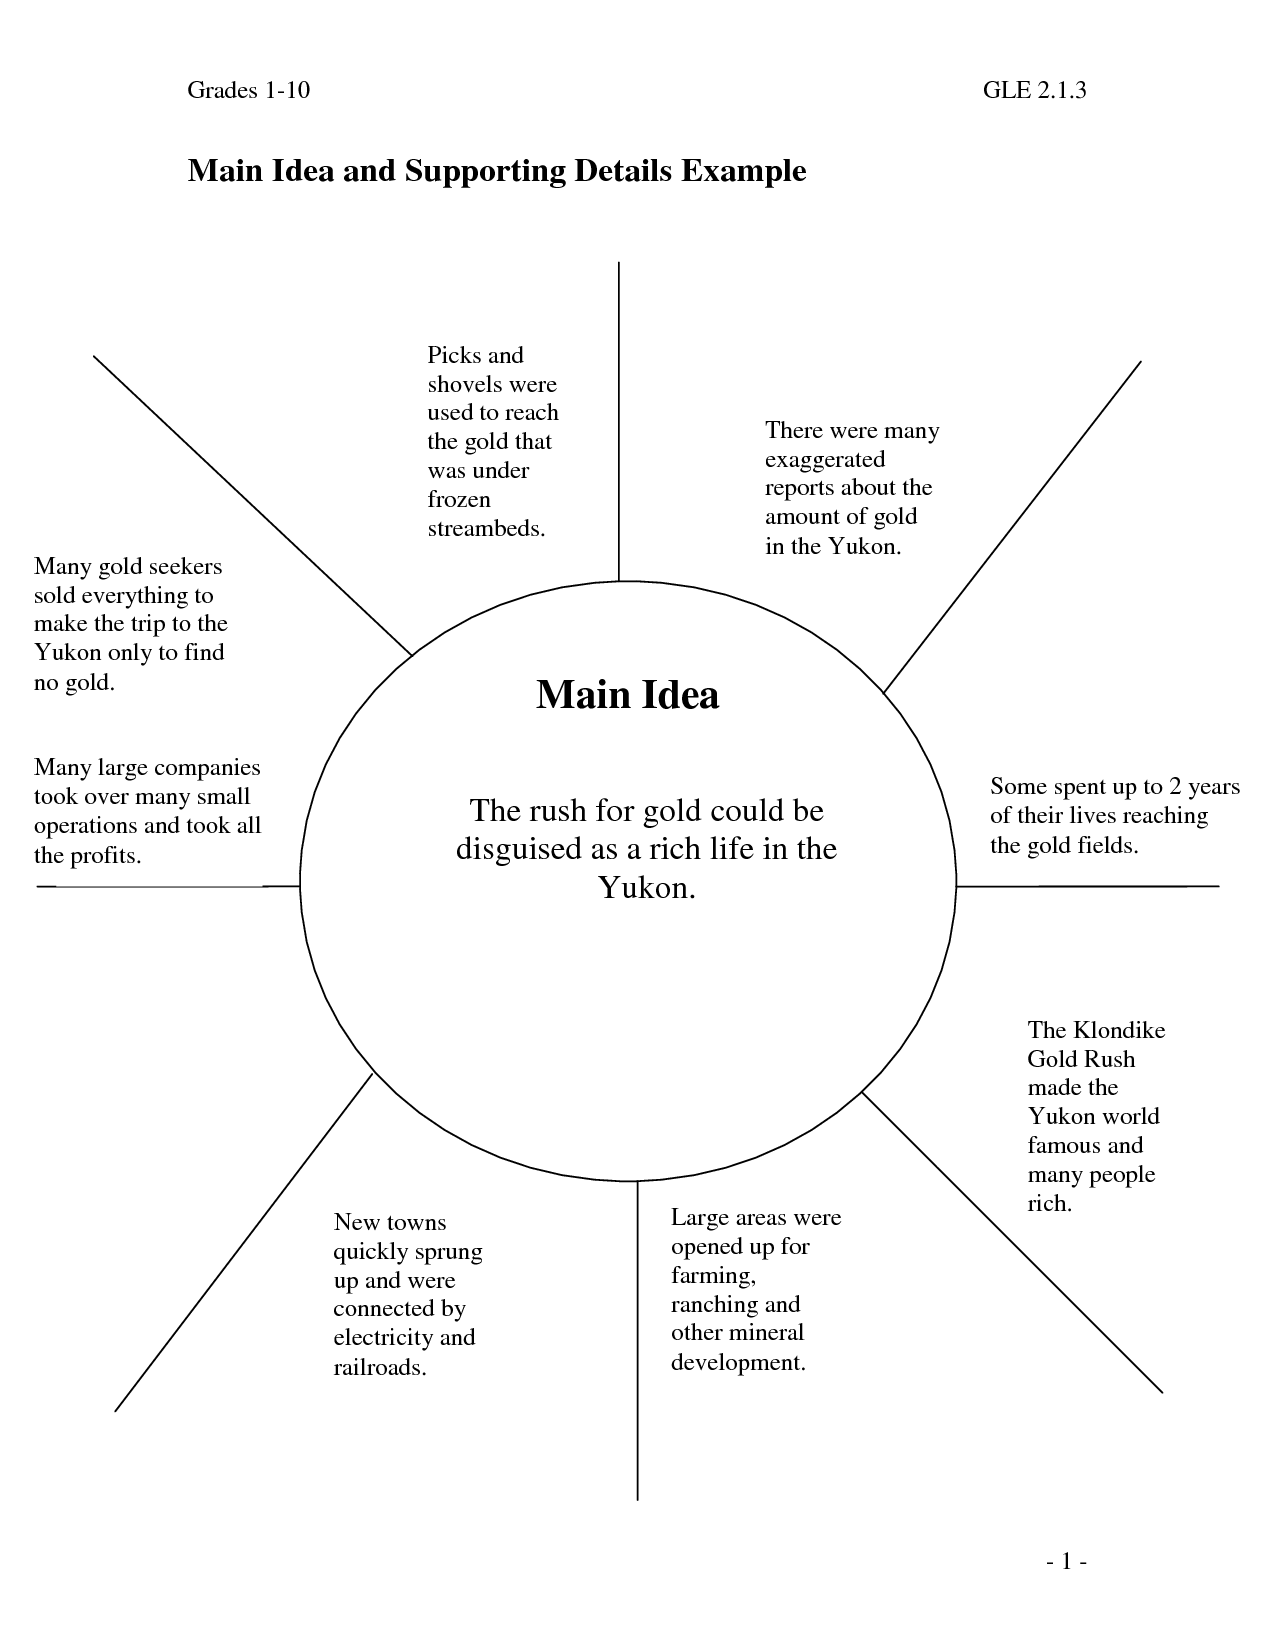 13 Best Images Of Idea Supporting And Main Worksheets Details Practice 